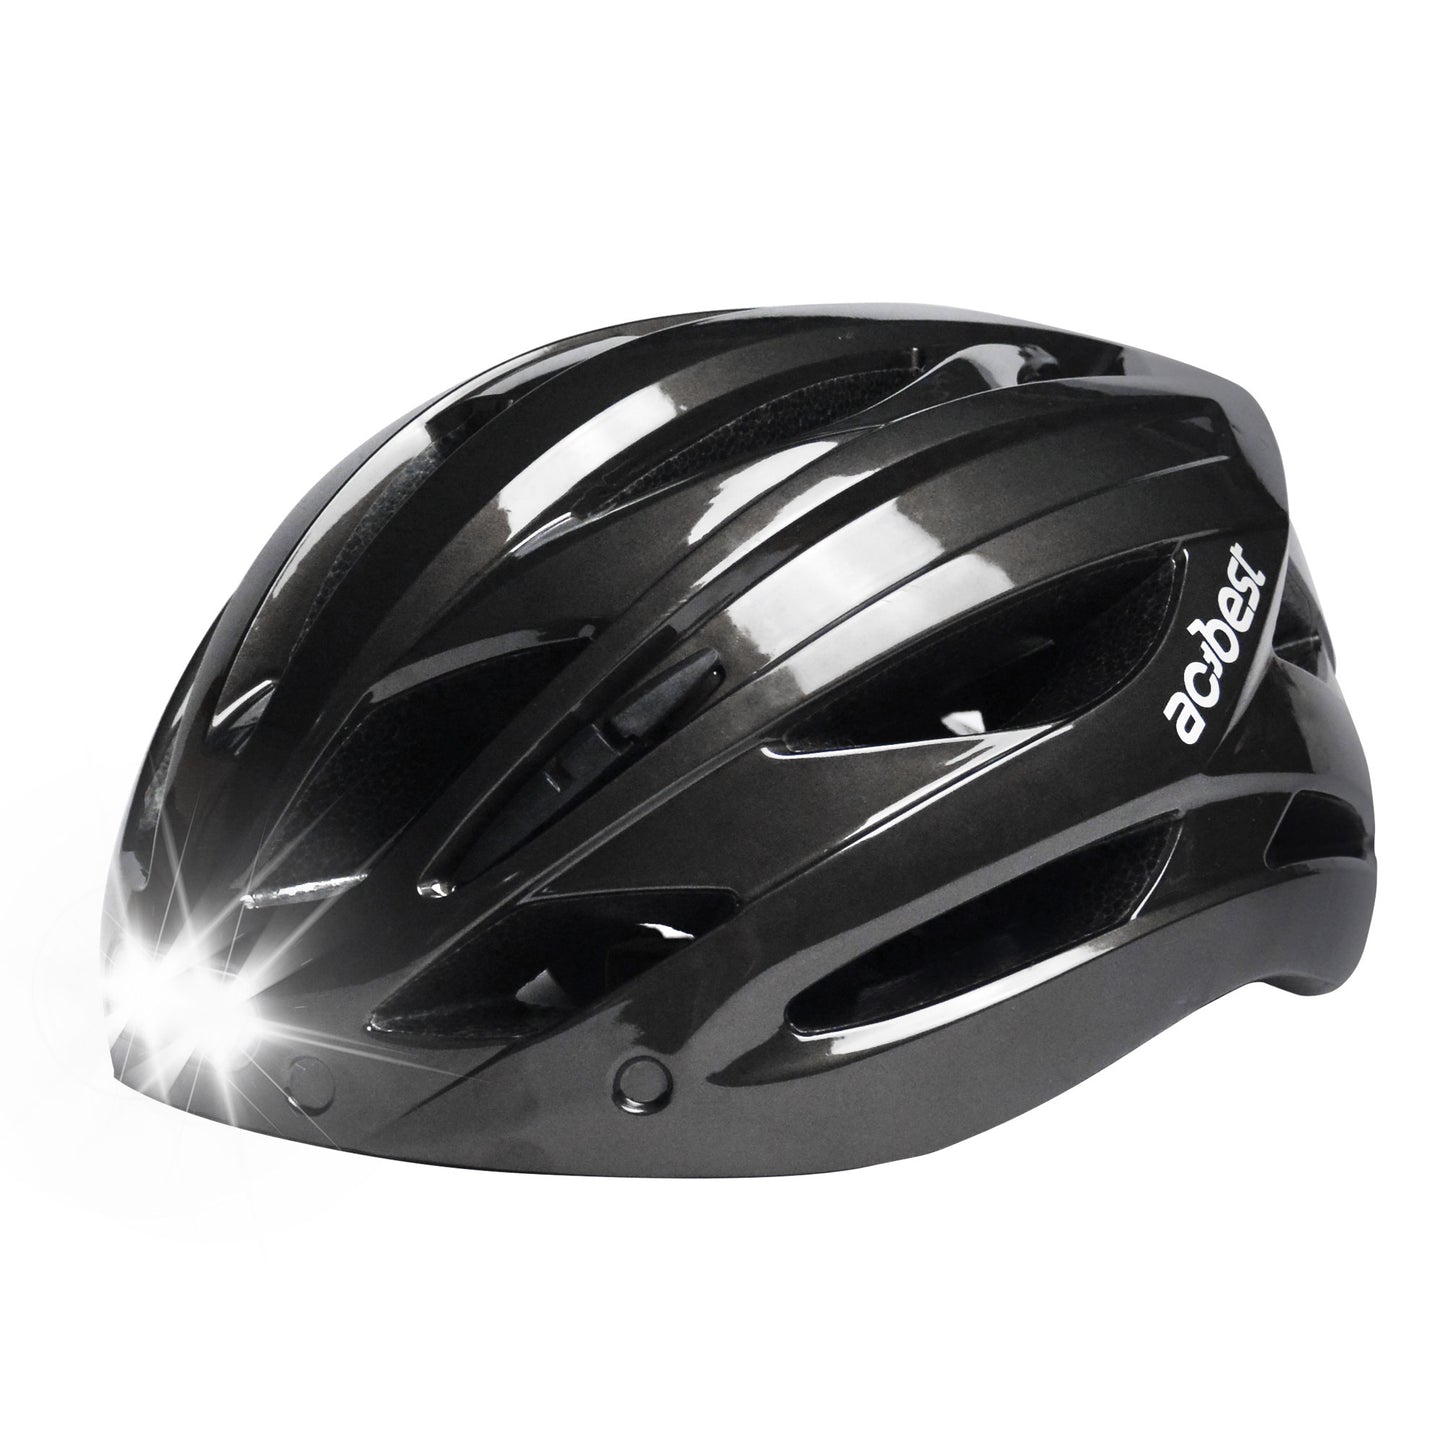 Adult Bike Helmet with USB Rechargeable LED Front and Back Light